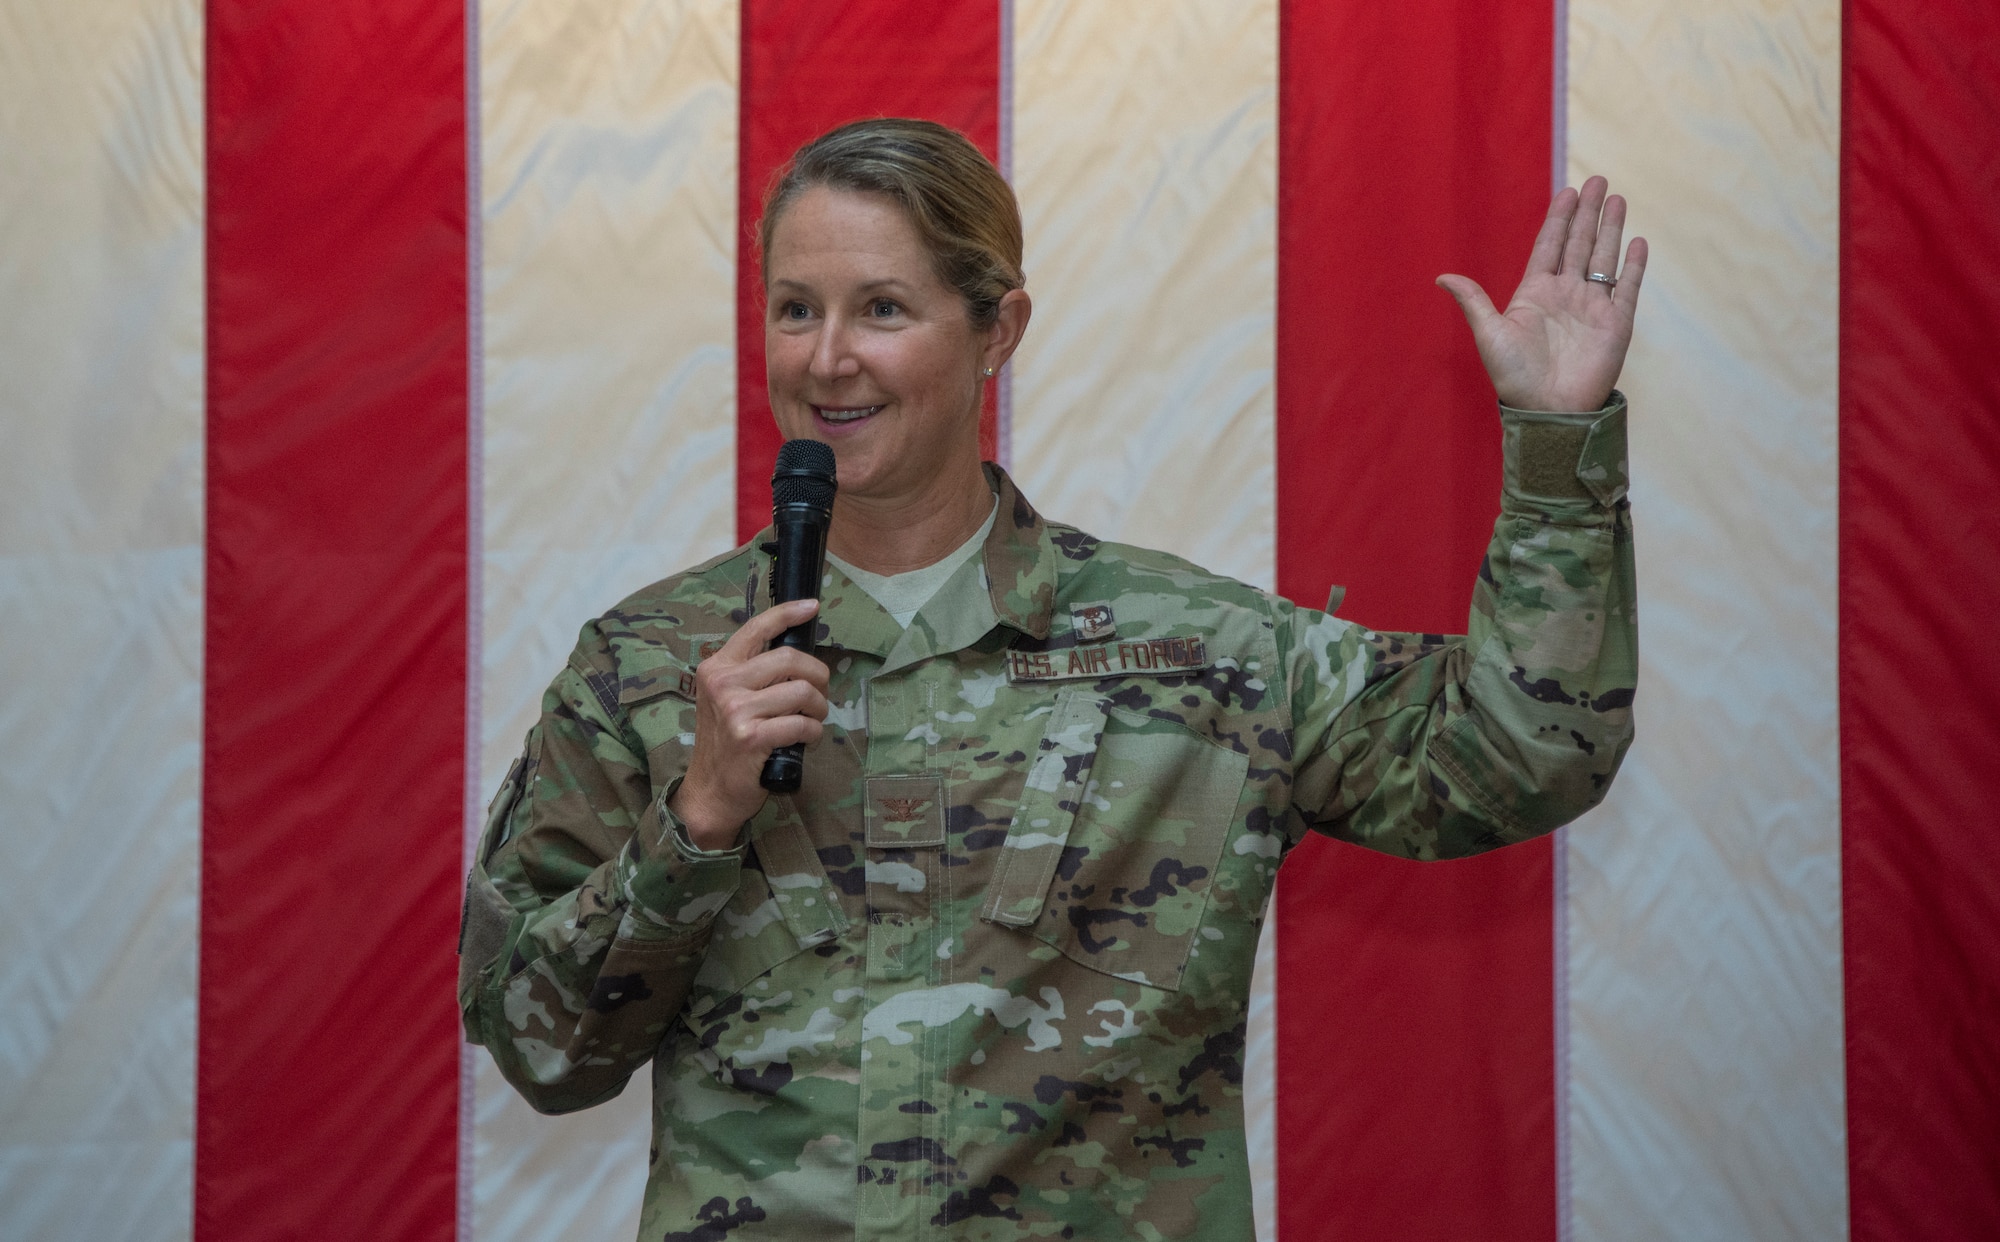 U.S. Air Force Col. Kristen Beals, 60th Medical Group commander, delivers remarks during the Women’s History Month social gathering, March 20, 2019, at Travis Air Force Base, California. Since 1987, the month of March has been designated to celebrate the historical and ongoing achievements and contributions of women. Members of the Women Inspiring the Next Generation’s Success committee were responsible for organizing the event which included an exhibit highlighting extraordinary female heroes and featured speakers prominent in the Travis community. (U.S. Air Force photo by Heide Couch)